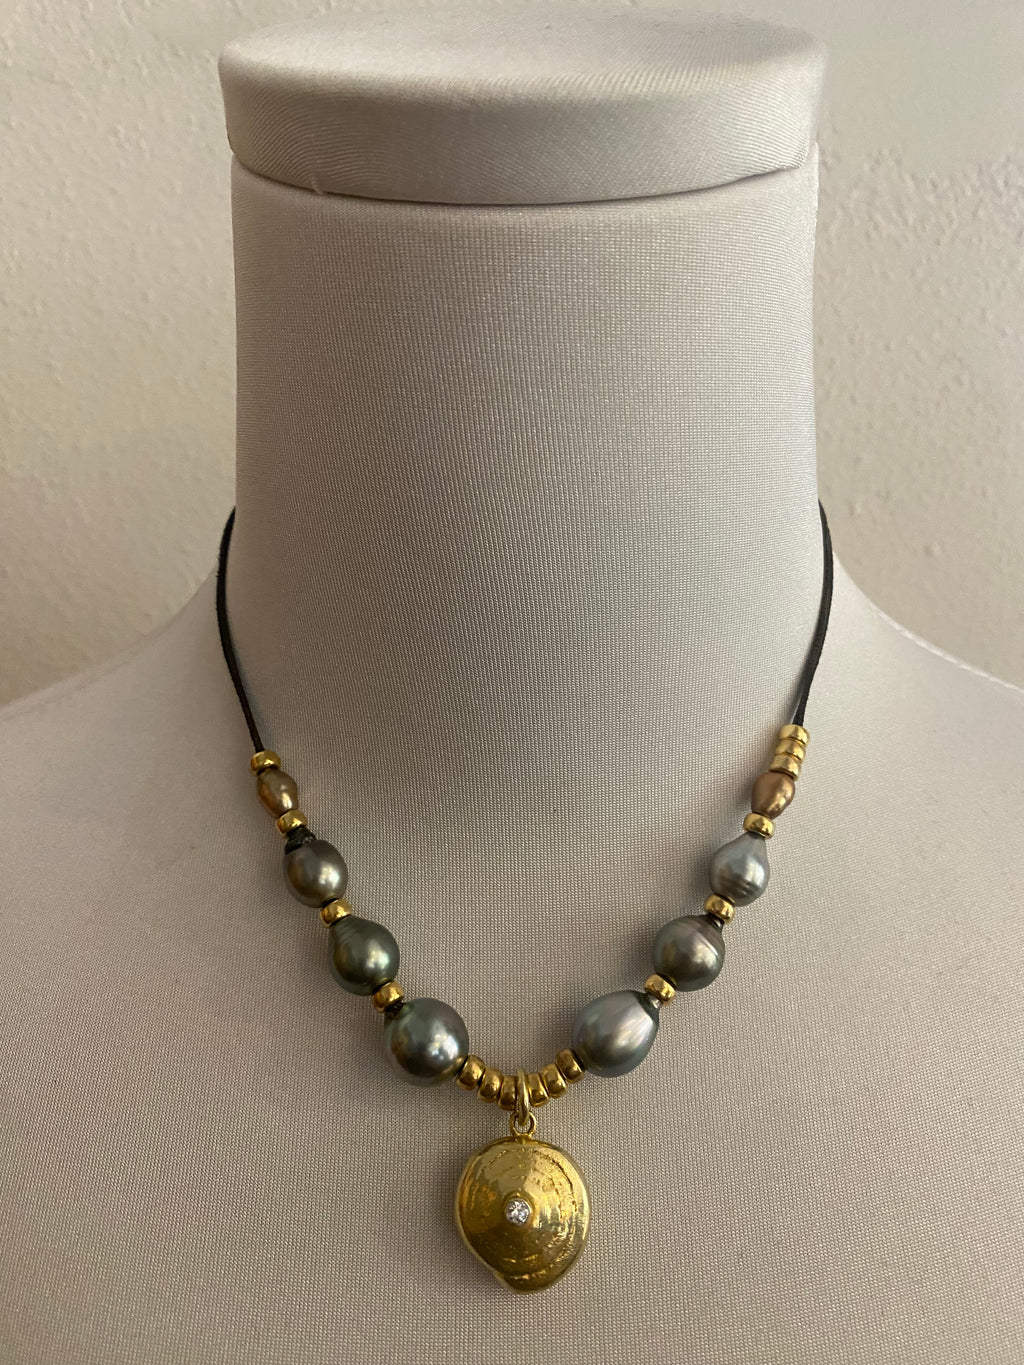 Tahitian Pearls and Vermeil Puka Necklace (l.s)